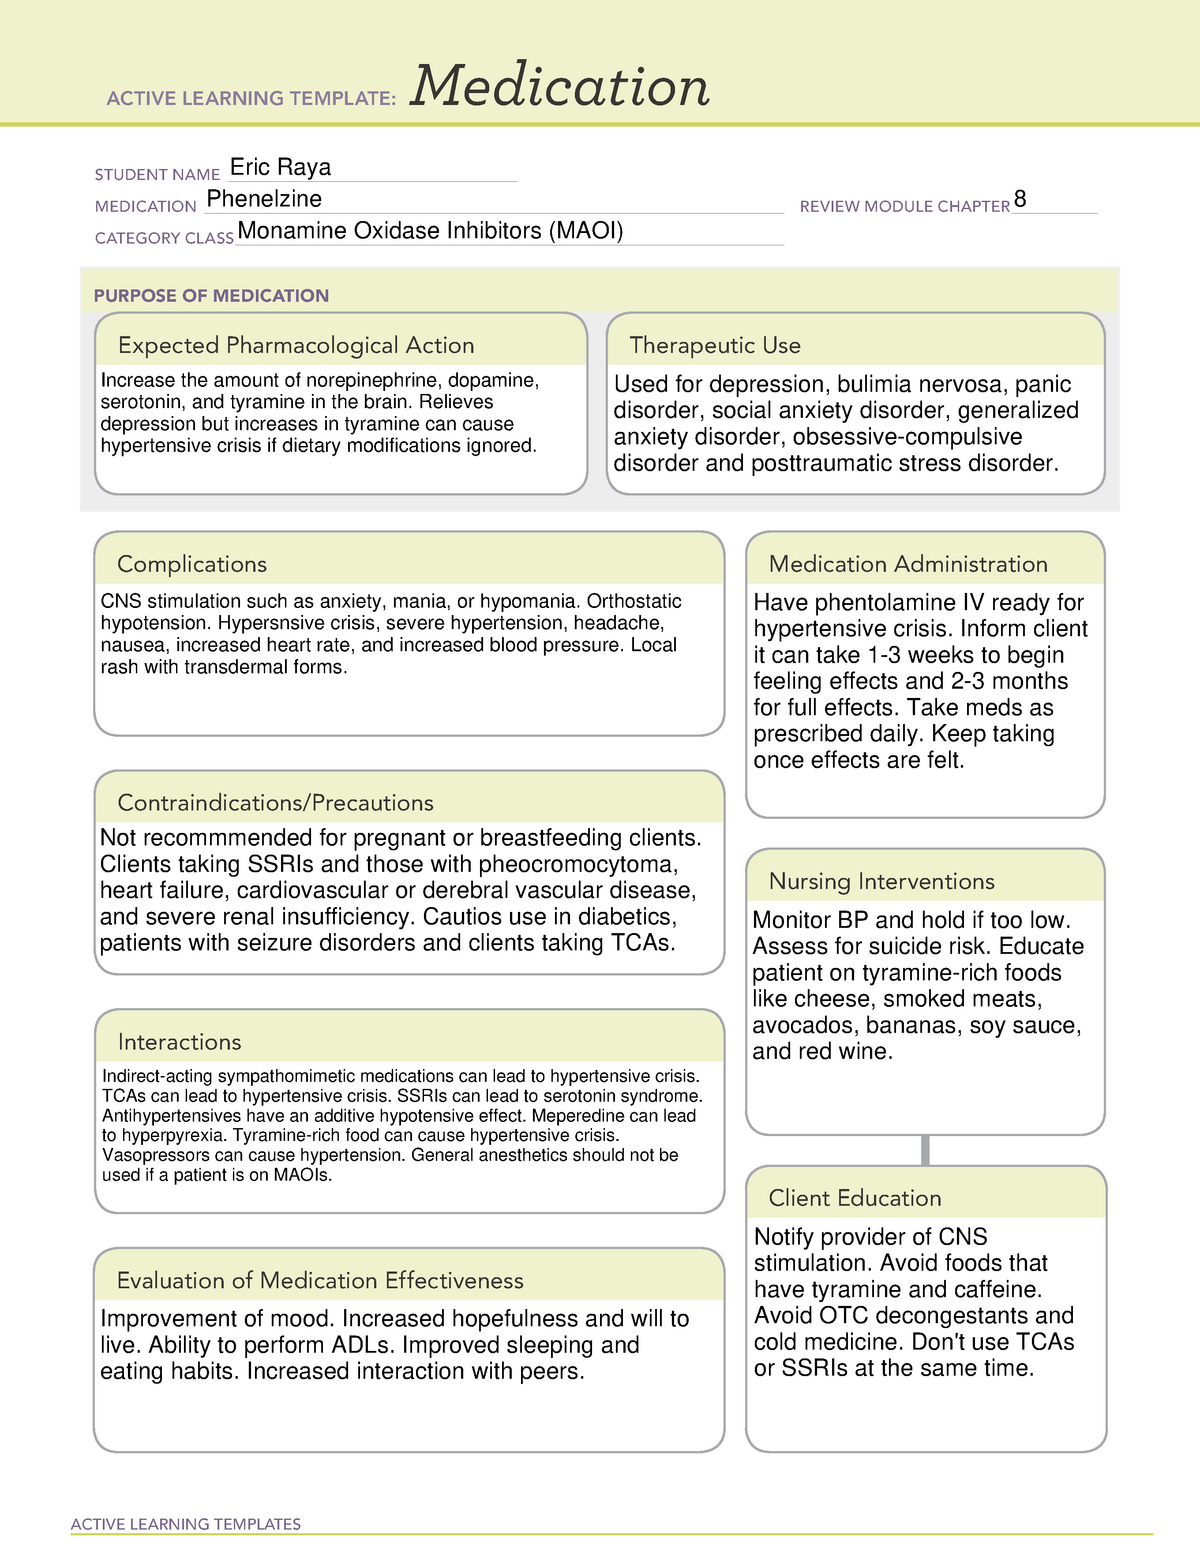 phenelzine-template-active-learning-templates-medication-student-name